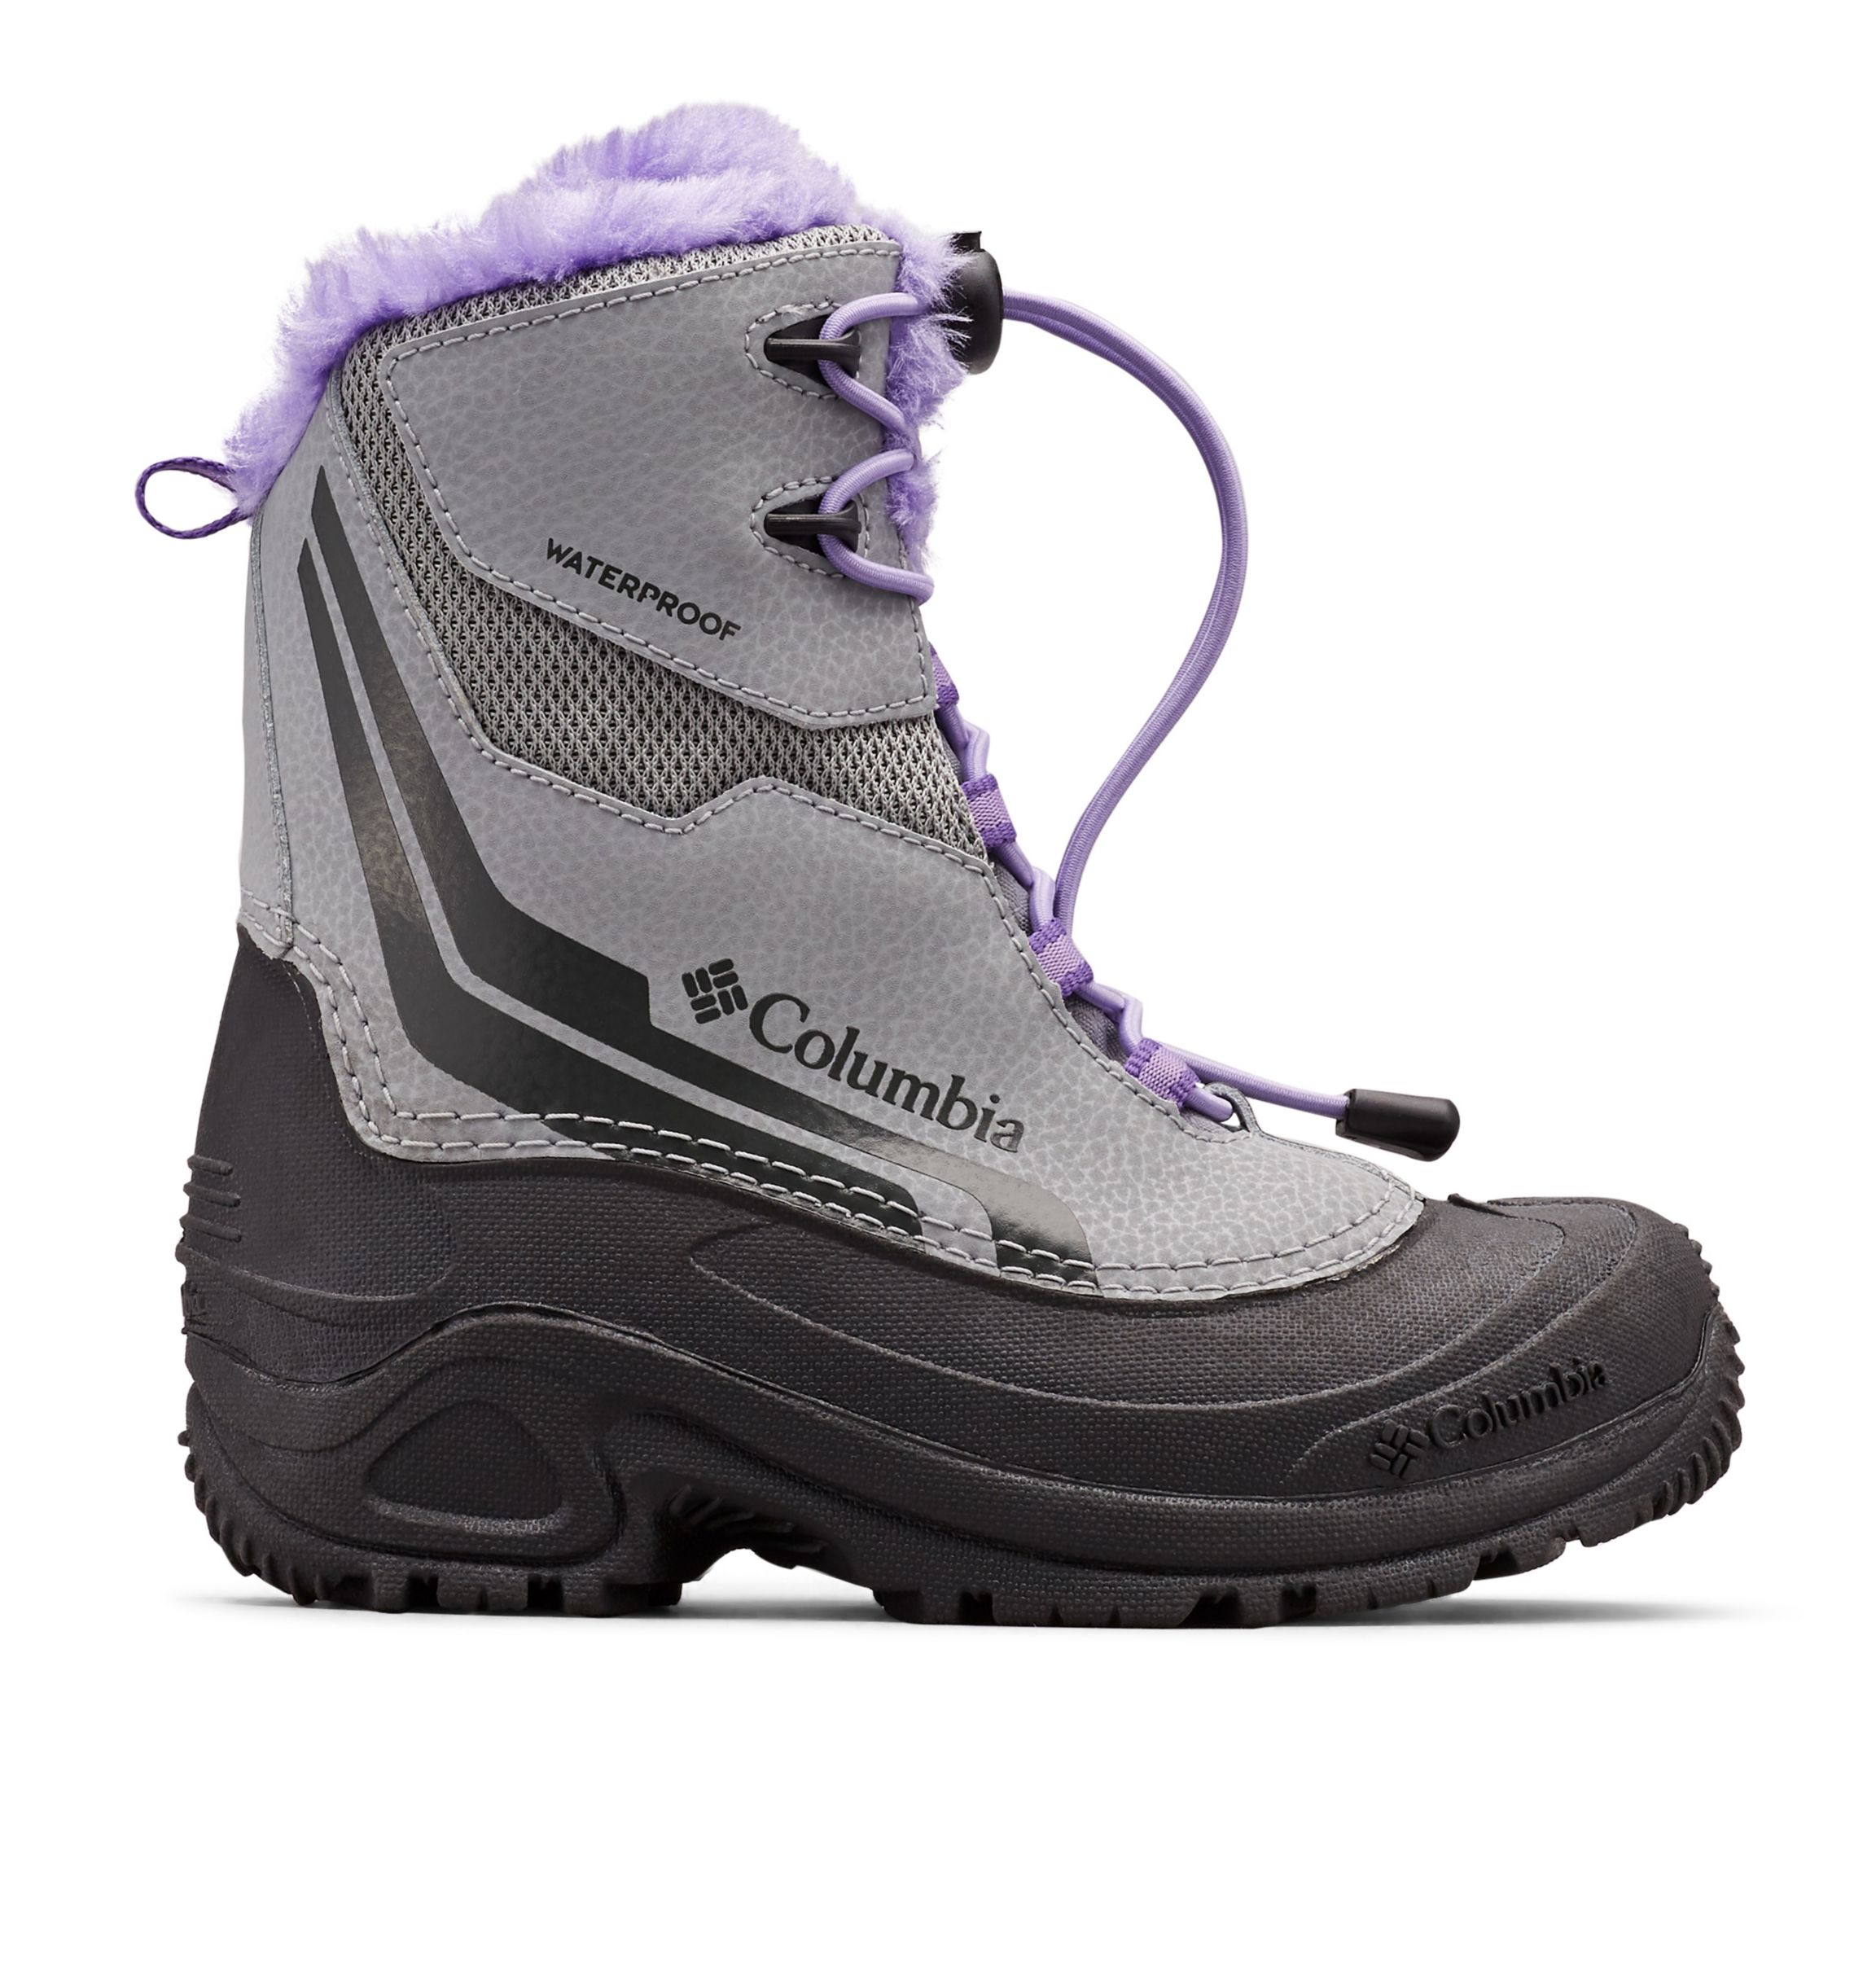 The Best Kids' Winter Snow Boots for Surviving Canadian Winters